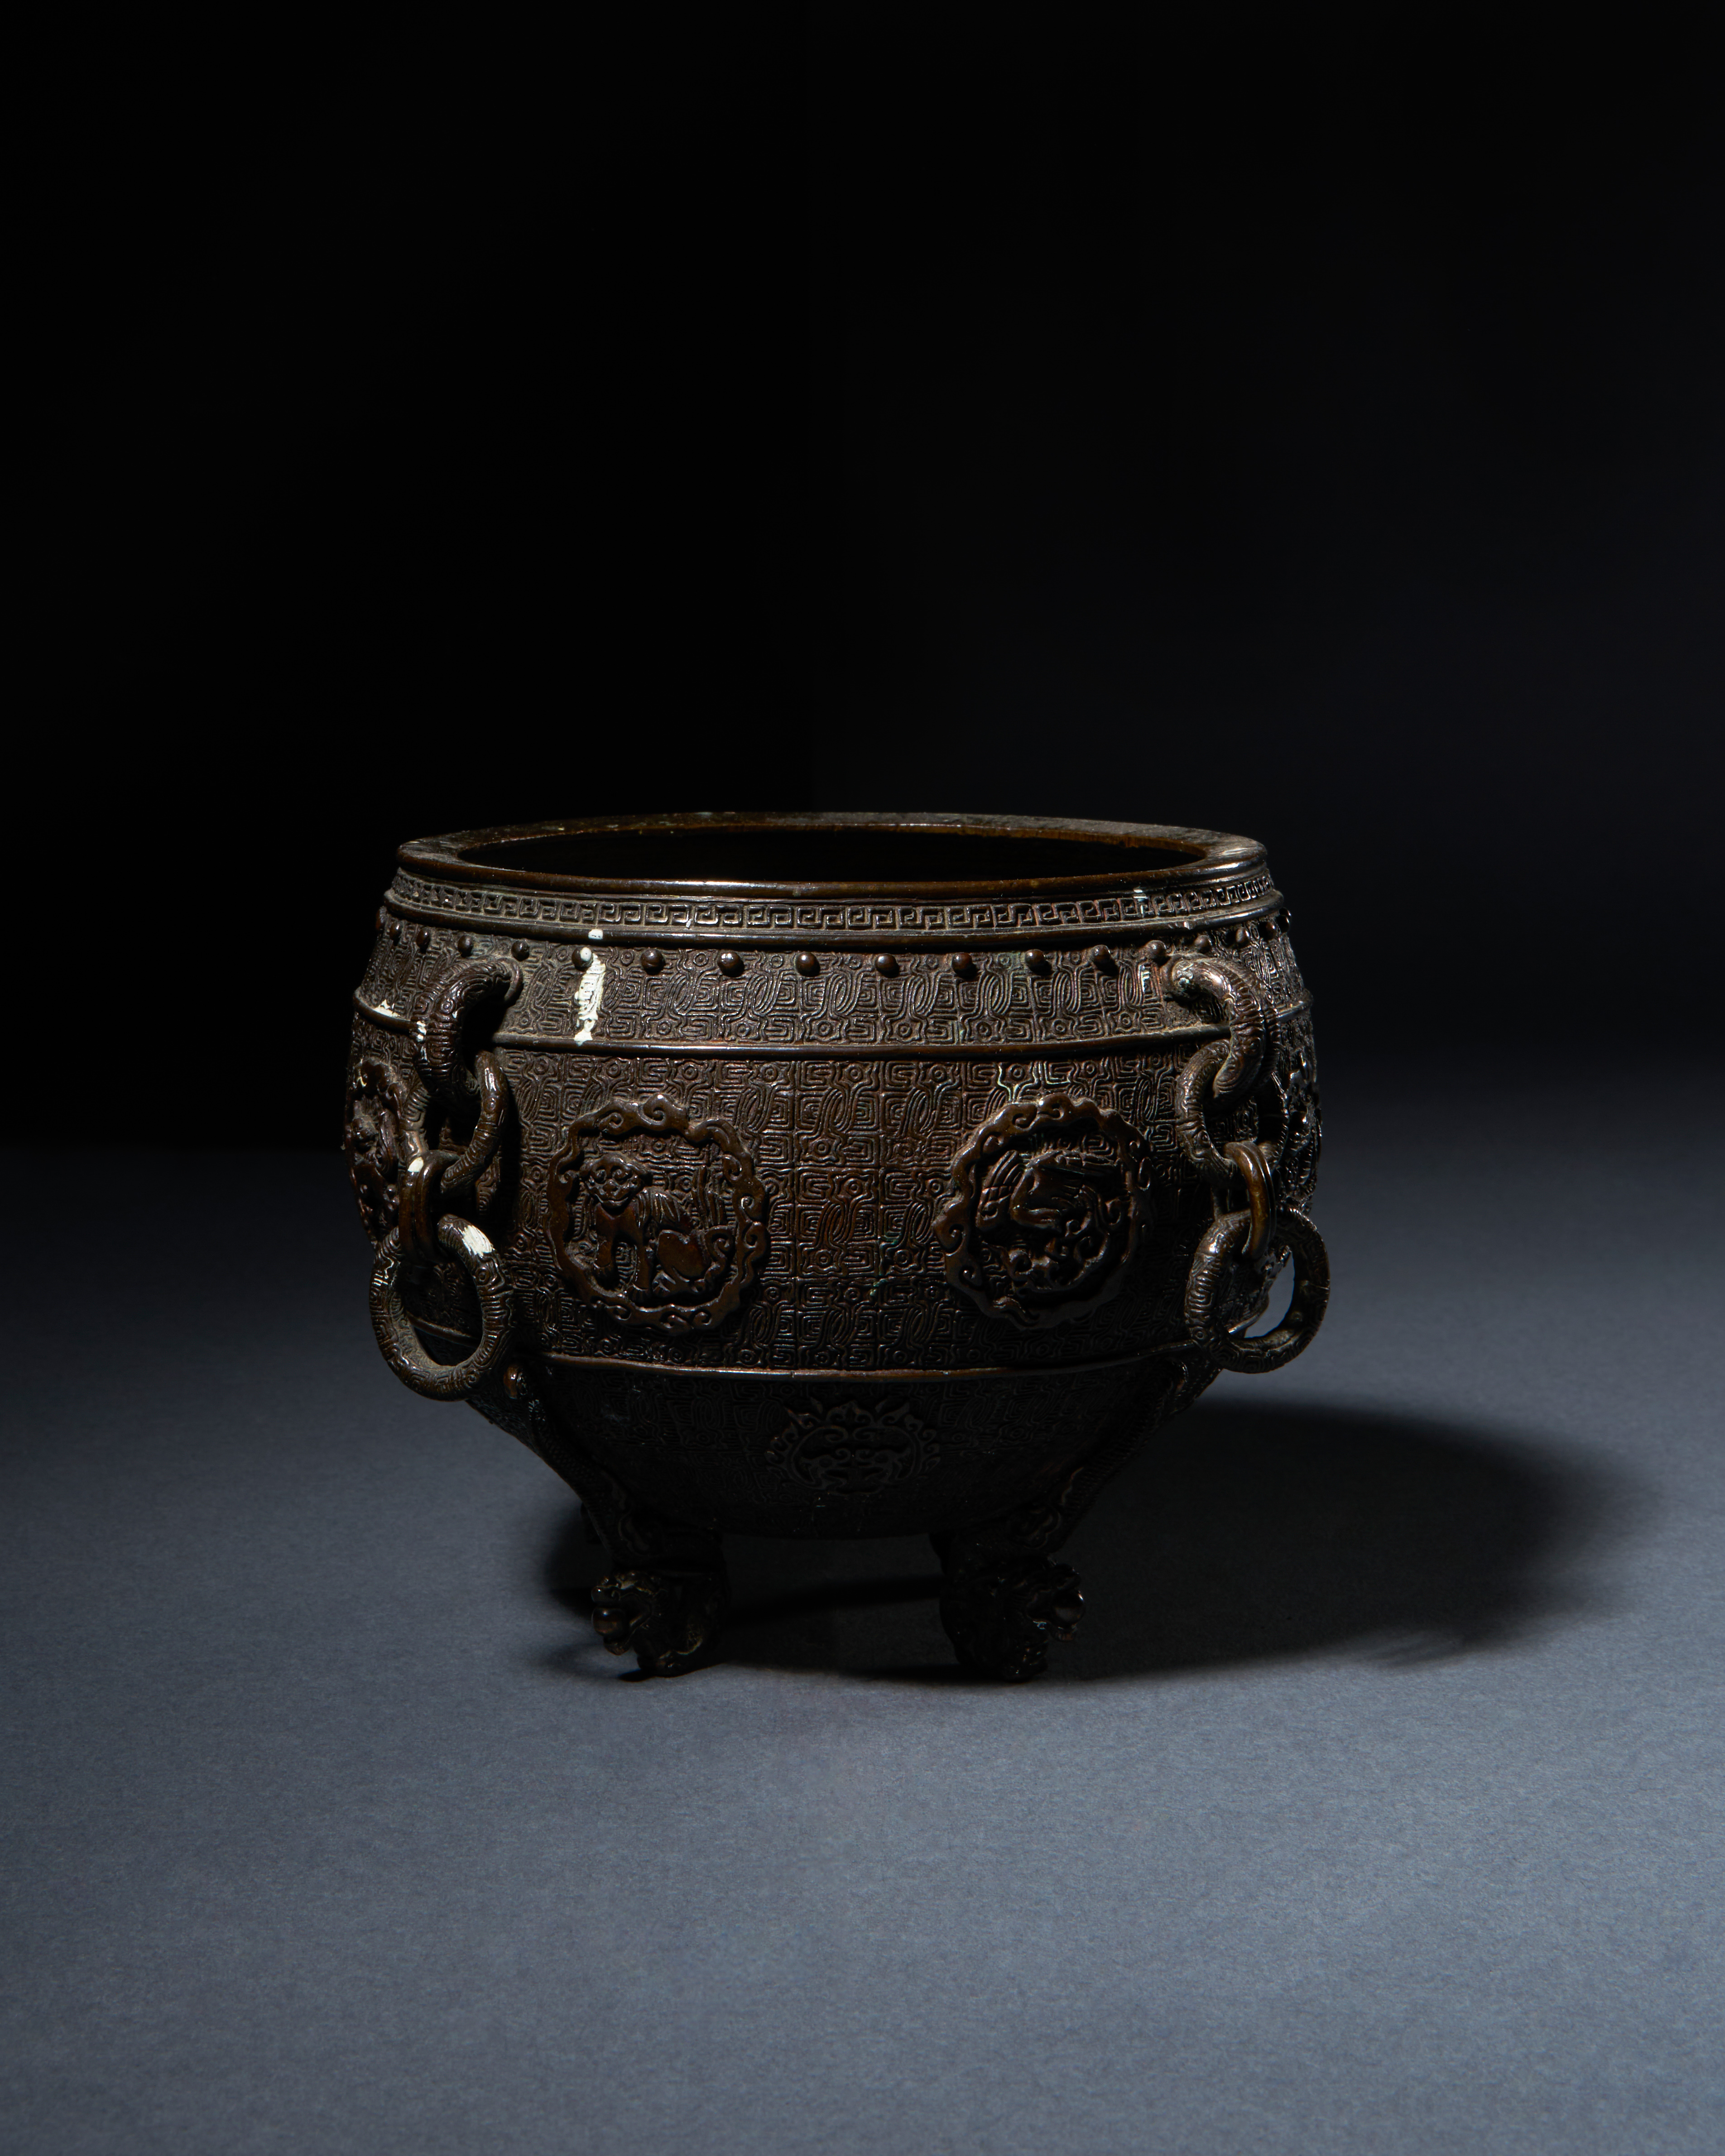 AN ARCHAISTIC BRONZE CENSER, QING DYNASTY (1644-1911) - Image 3 of 6